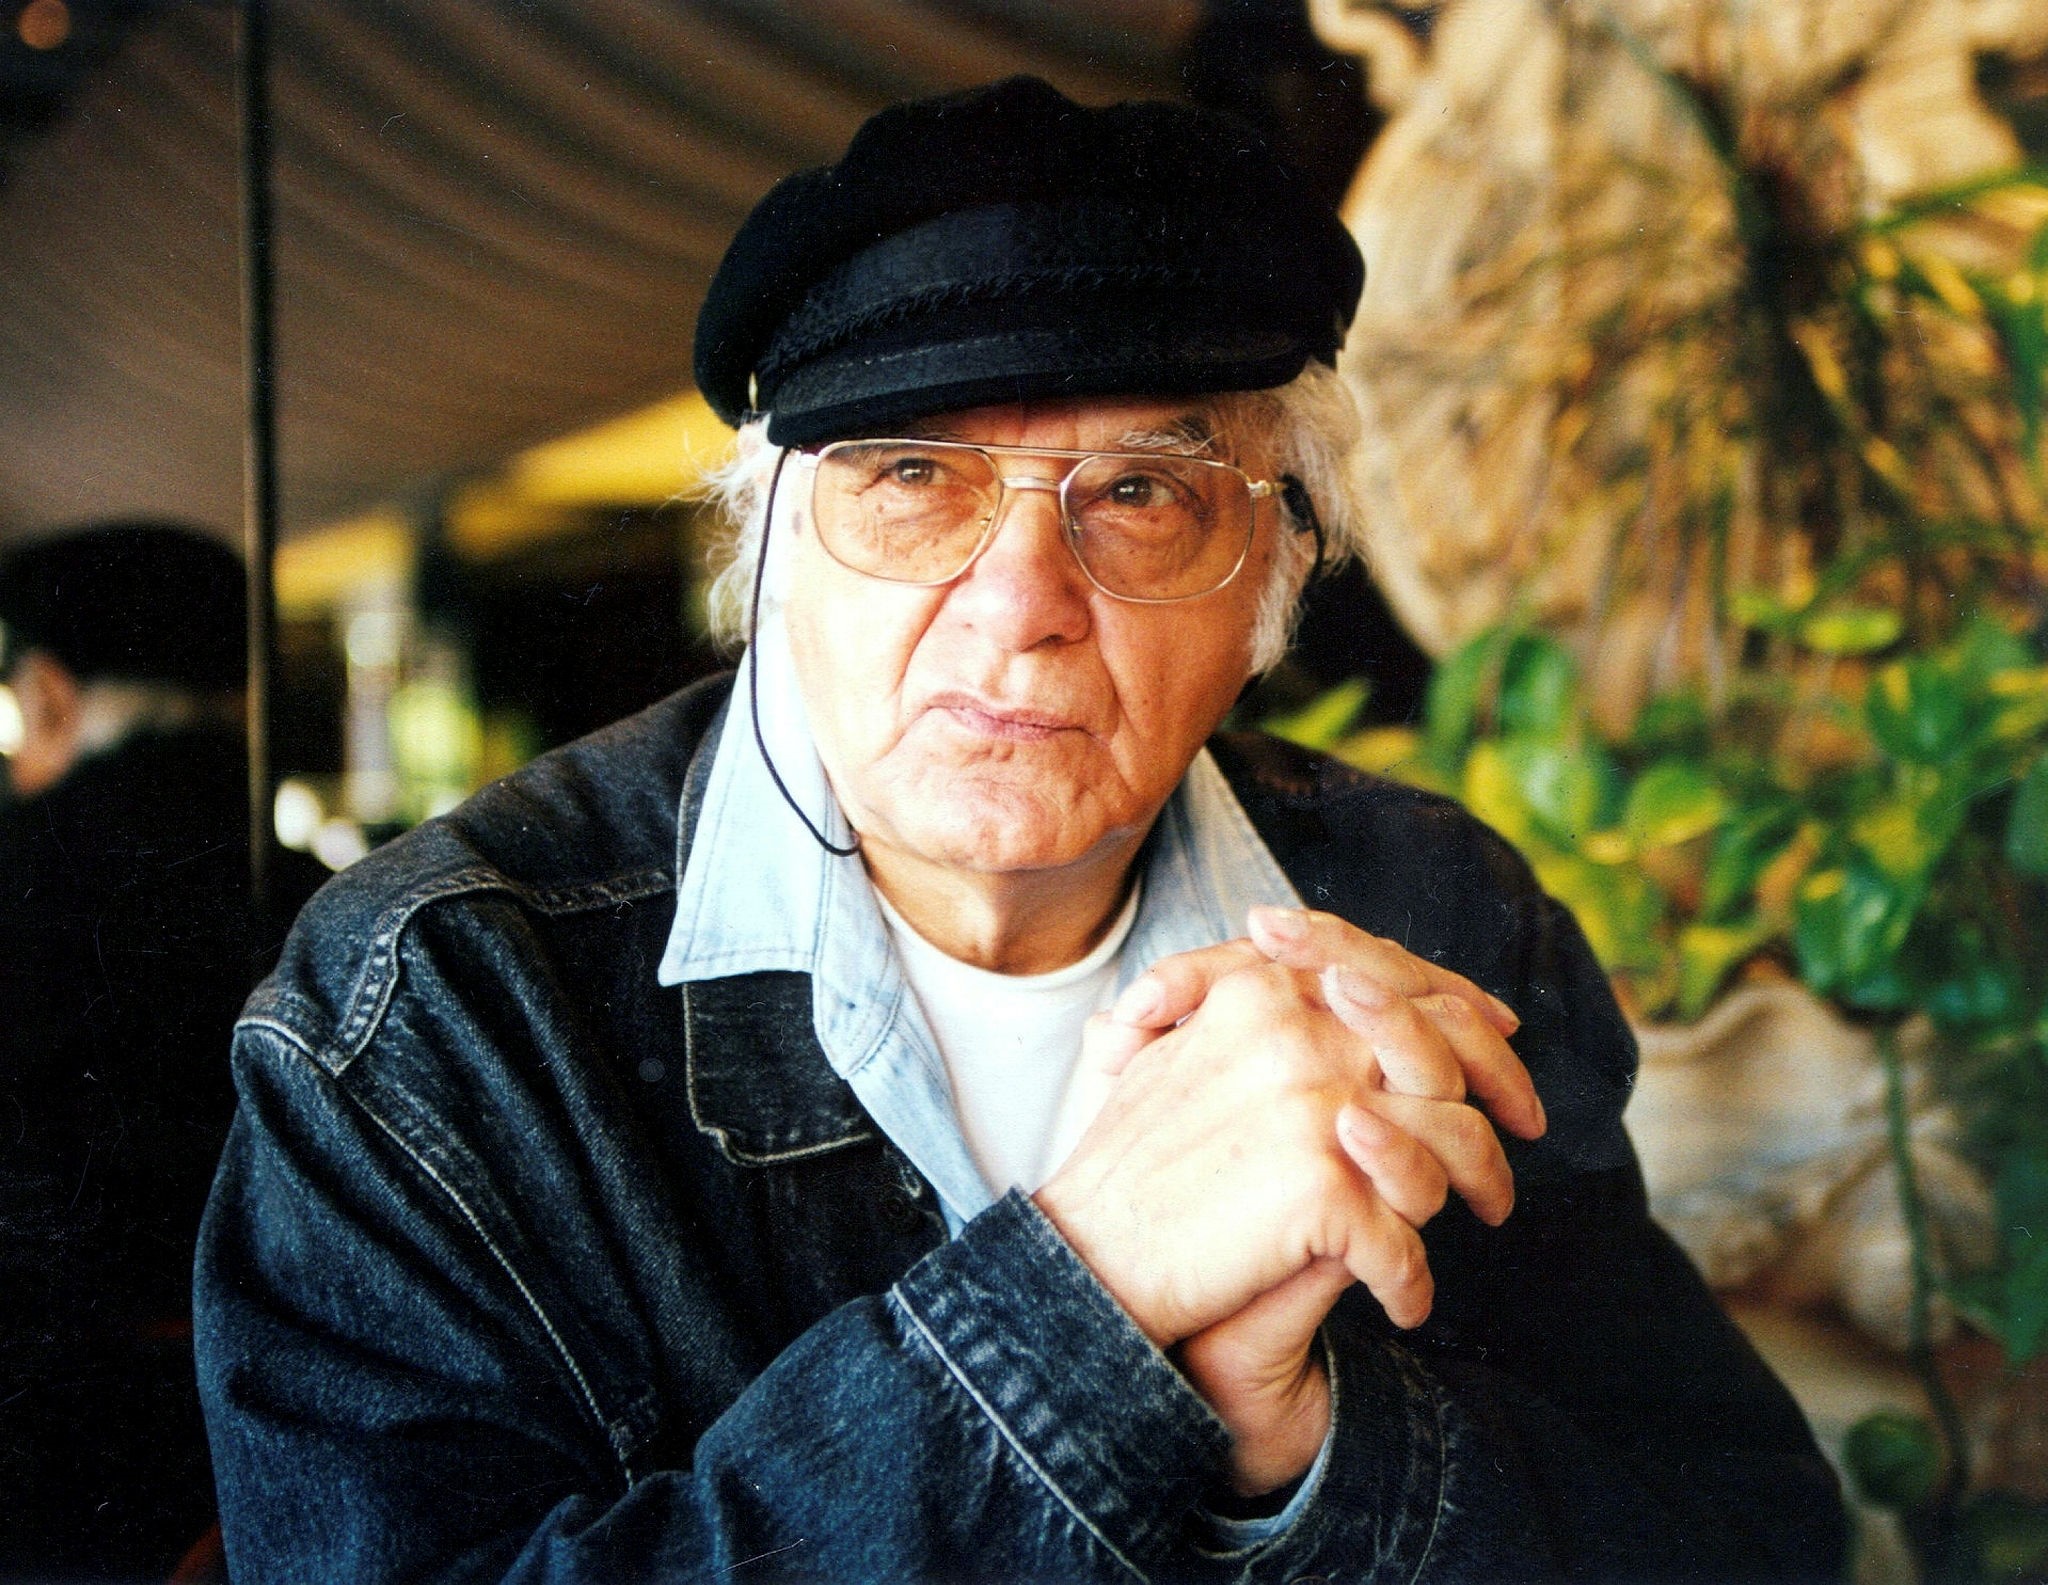 Attila u0130lhan was a prominent poet and remained one until his death in 2005.